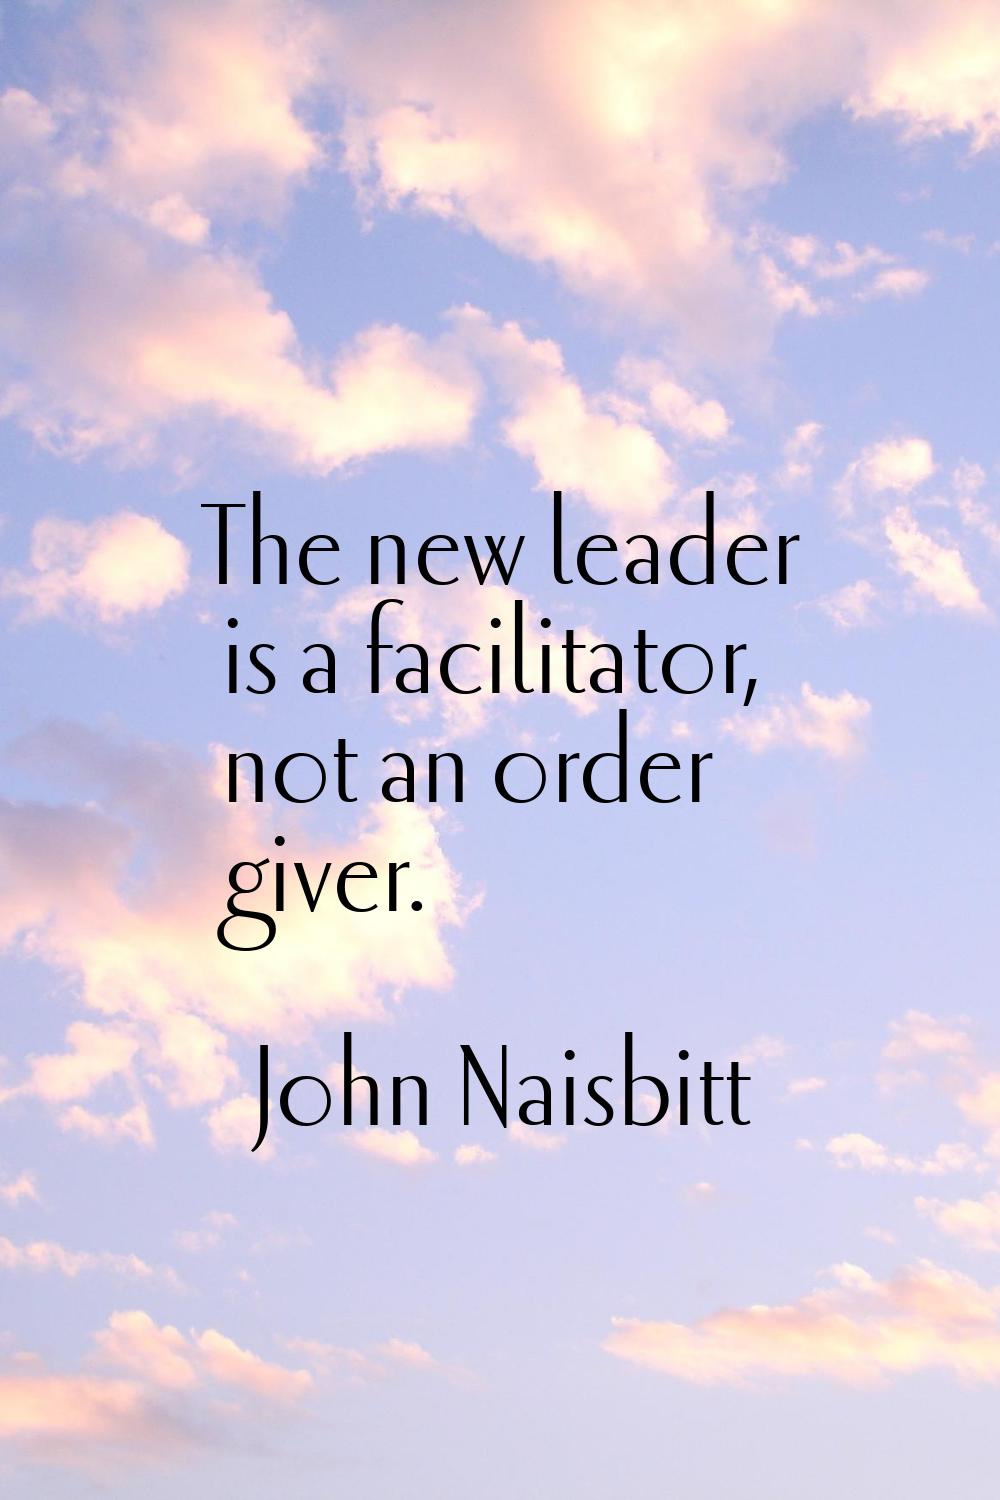 The new leader is a facilitator, not an order giver.